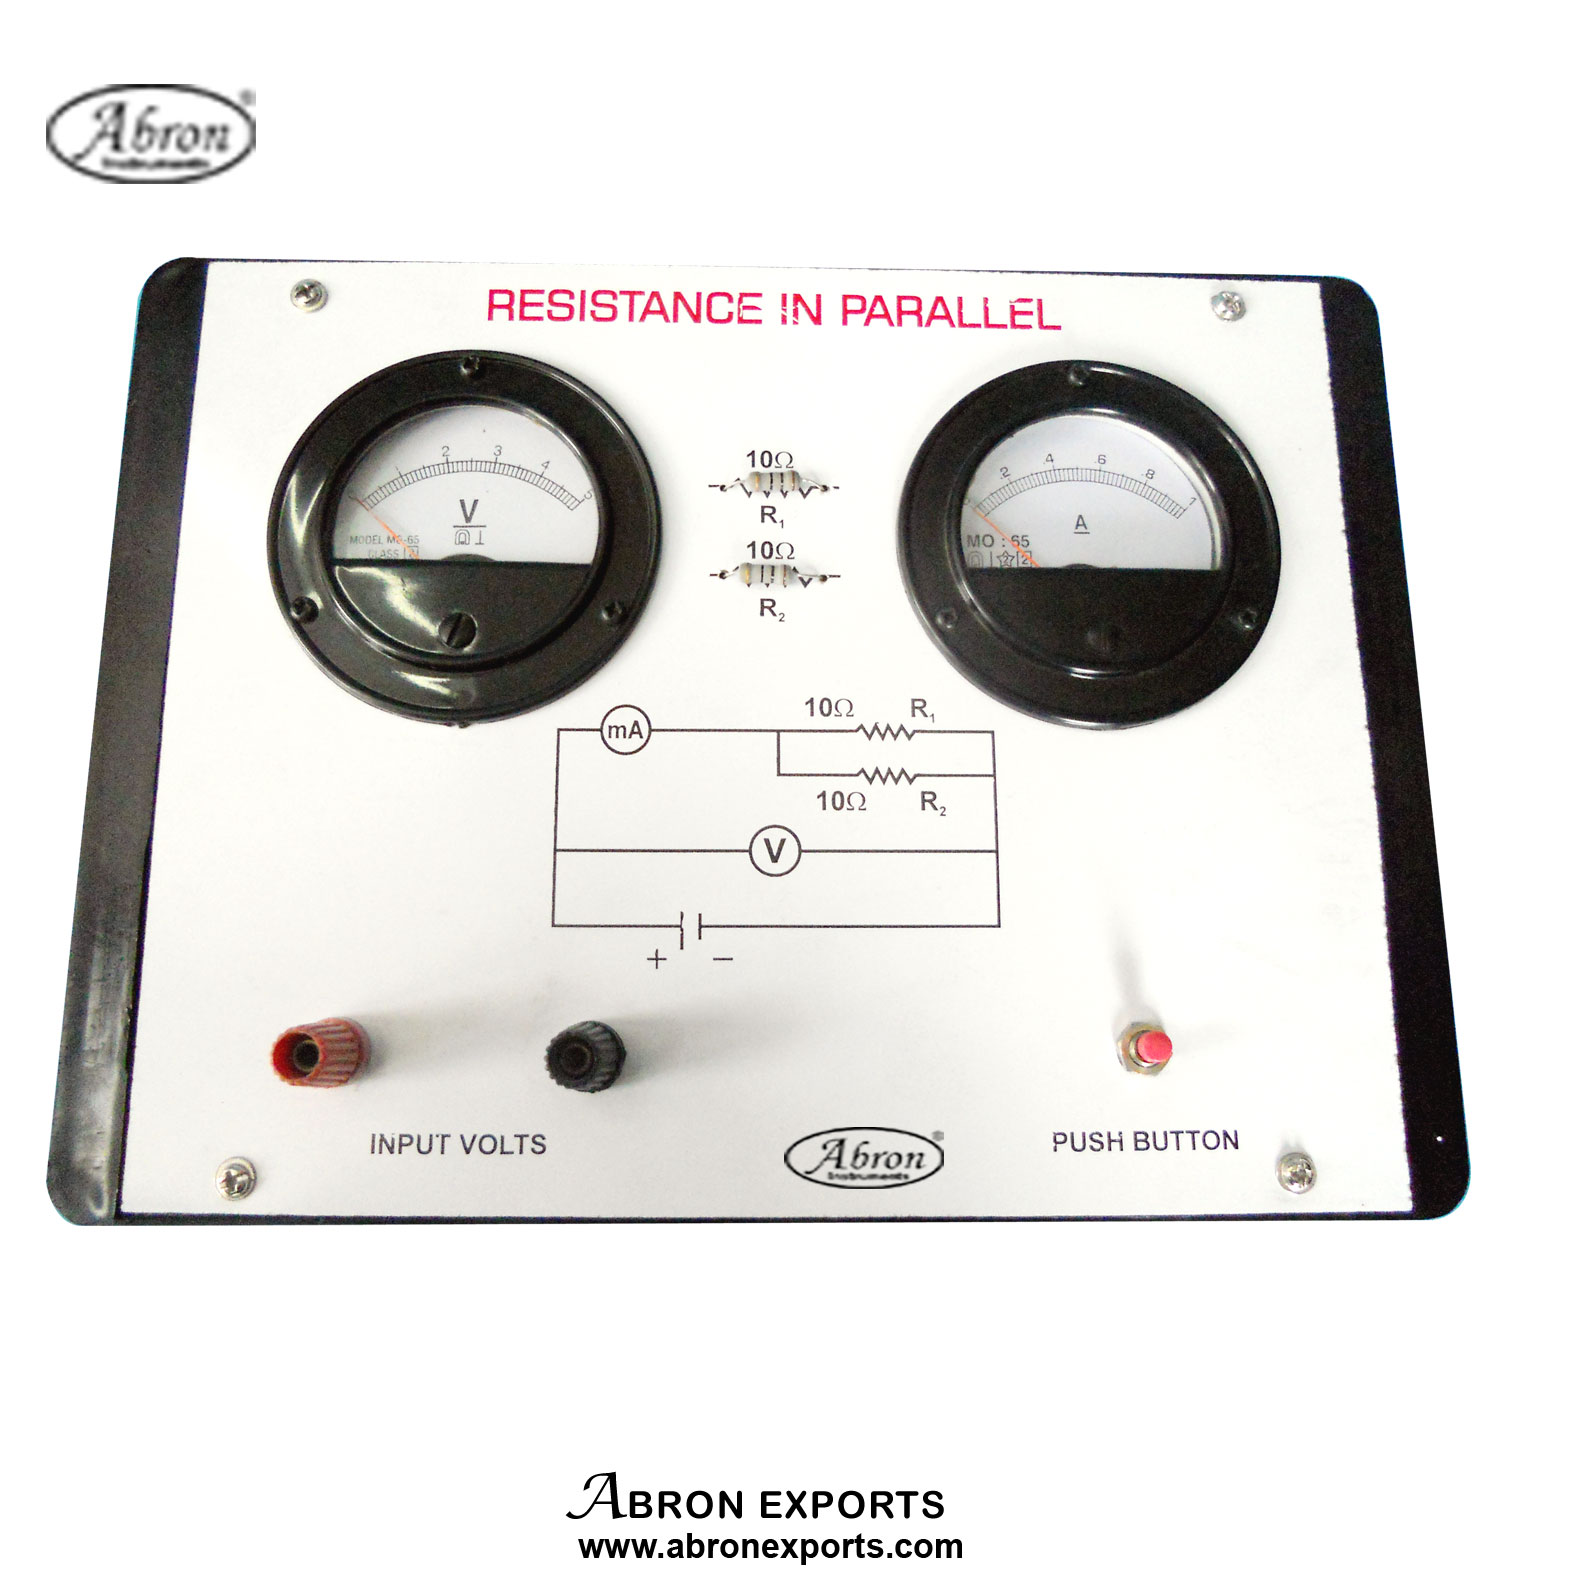 Resistances in Parallel Study With Connectors 2 meters Optional Power supply AE-1386RT